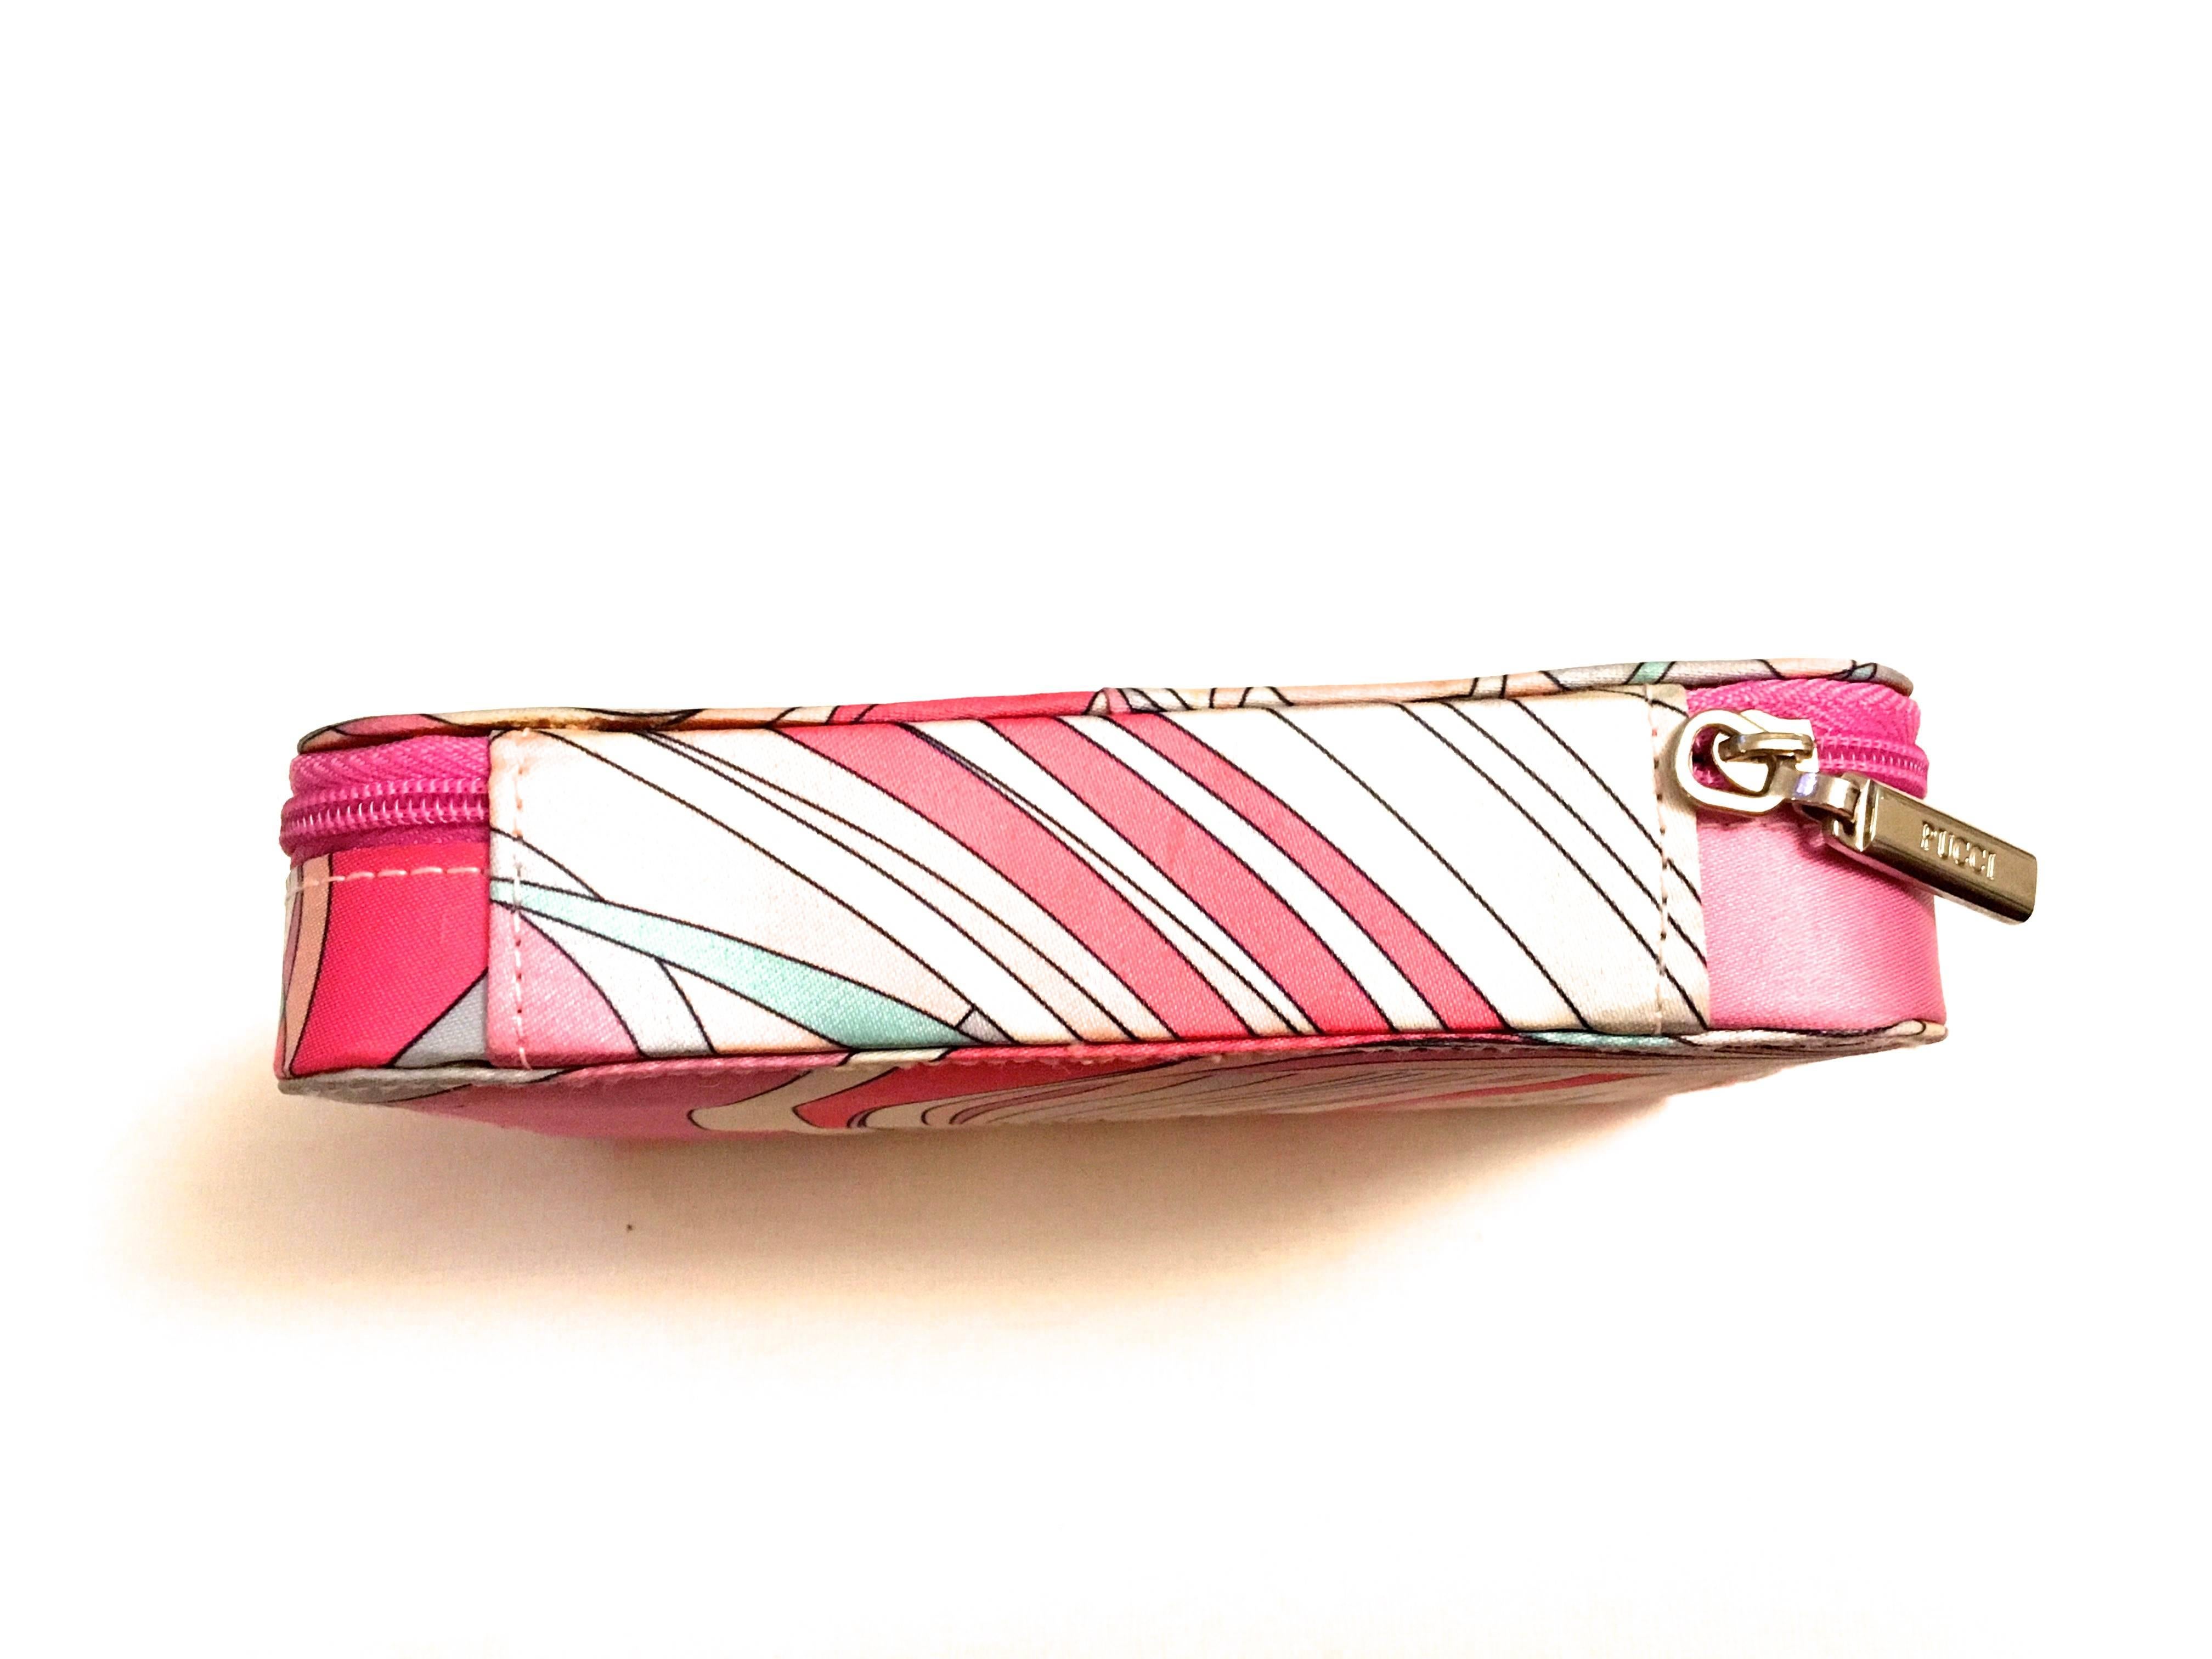 Presented here is a cosmetic case from Emilio Pucci. This rare cosmetic case was a special release from Emilio Pucci featuring Guerlain cosmetics on the inside. The cosmetic case is a zip case that when opened reveals the full selection of